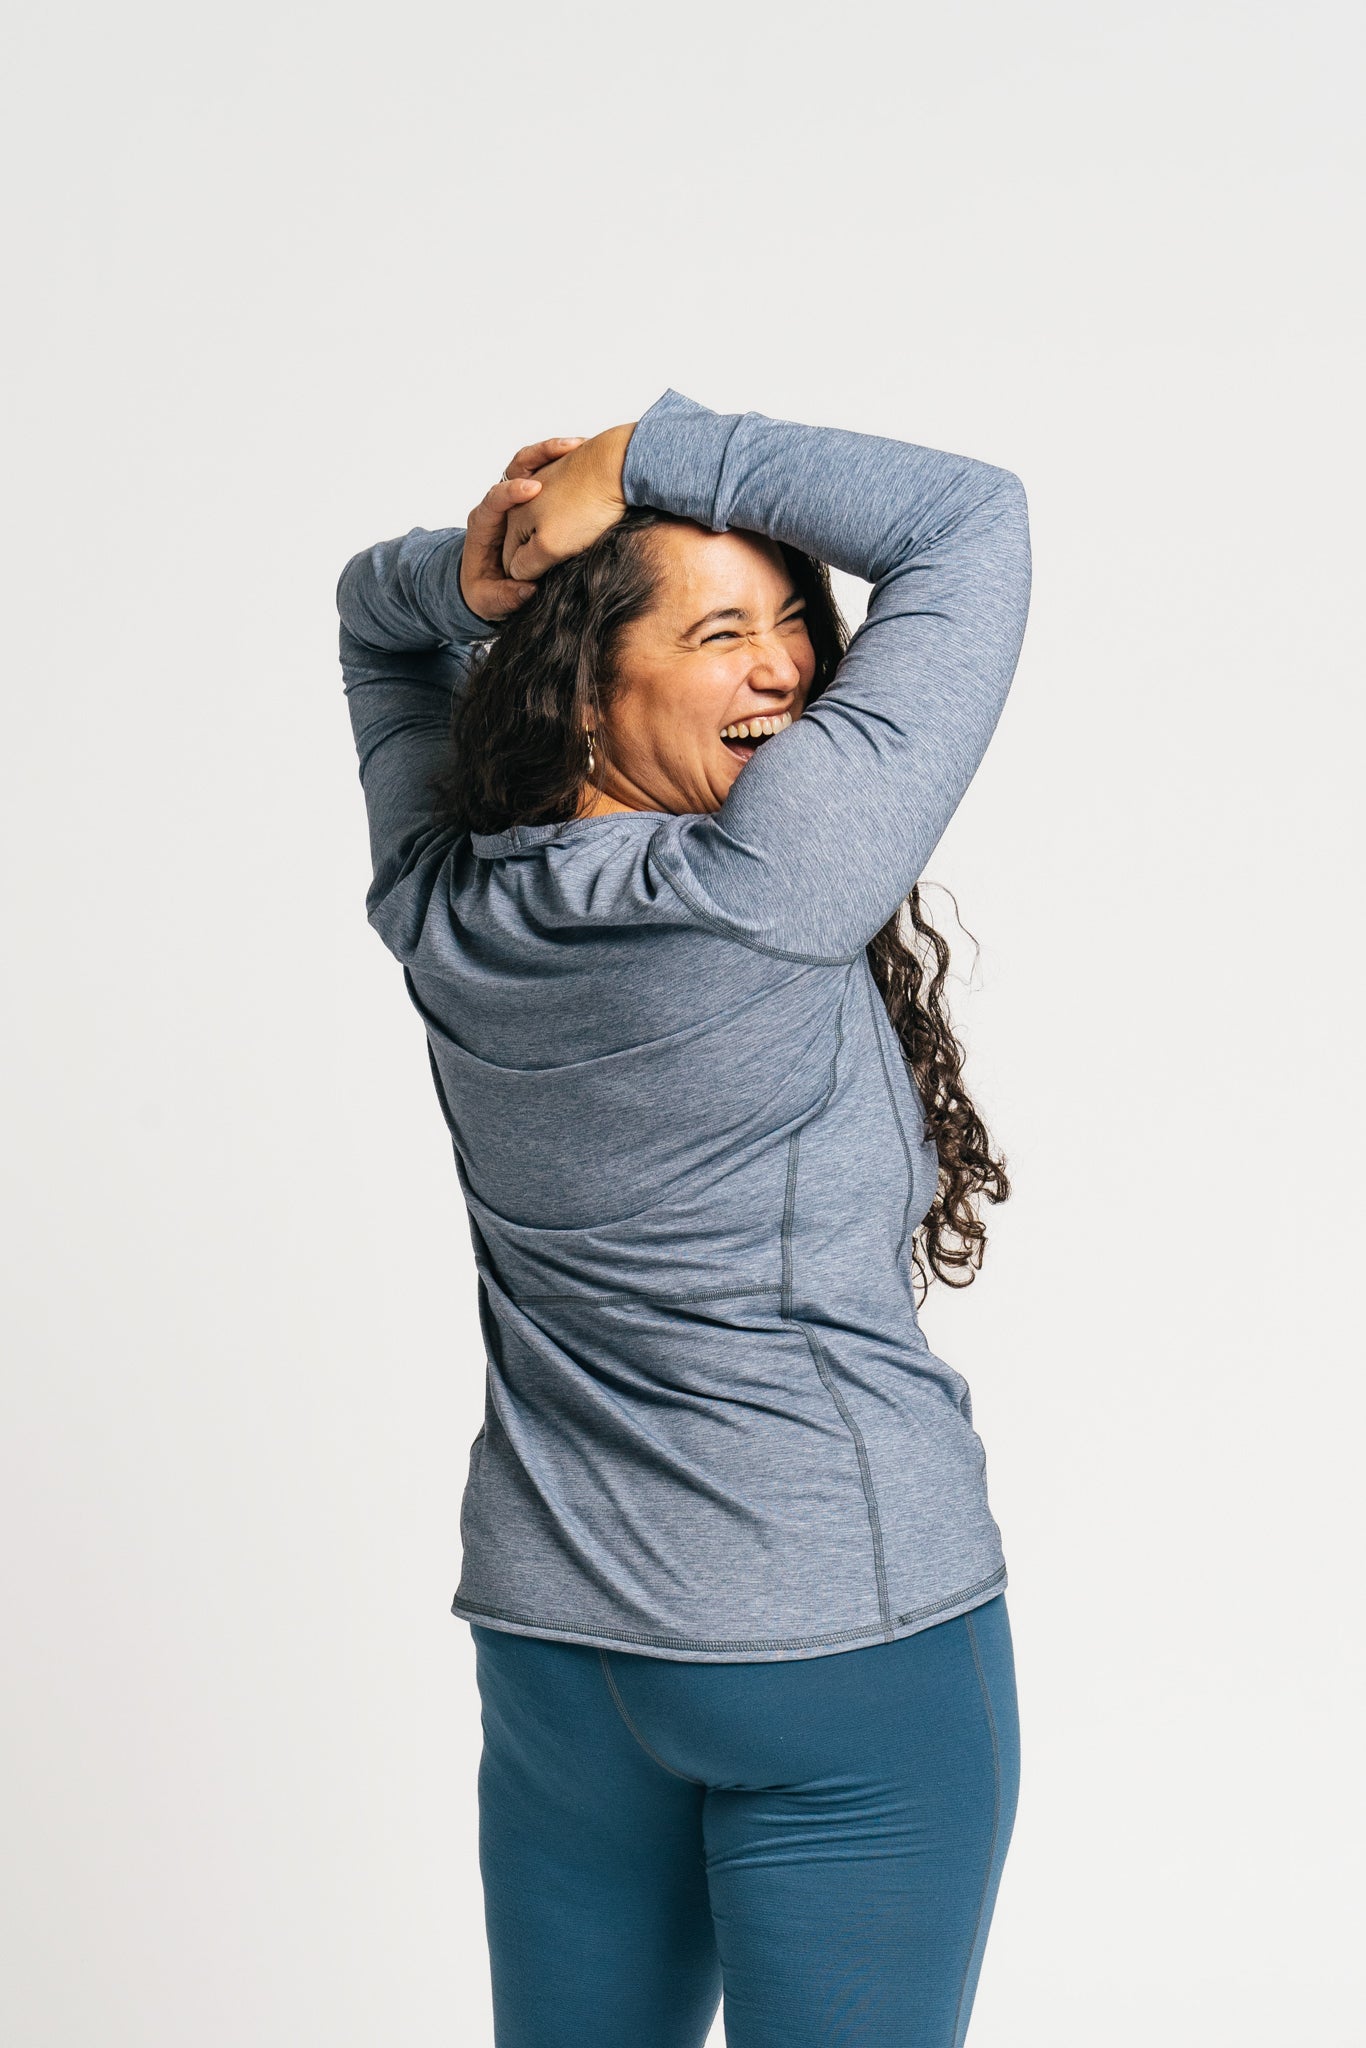 alpine fit long sleeve base layer blue on model back view smiling